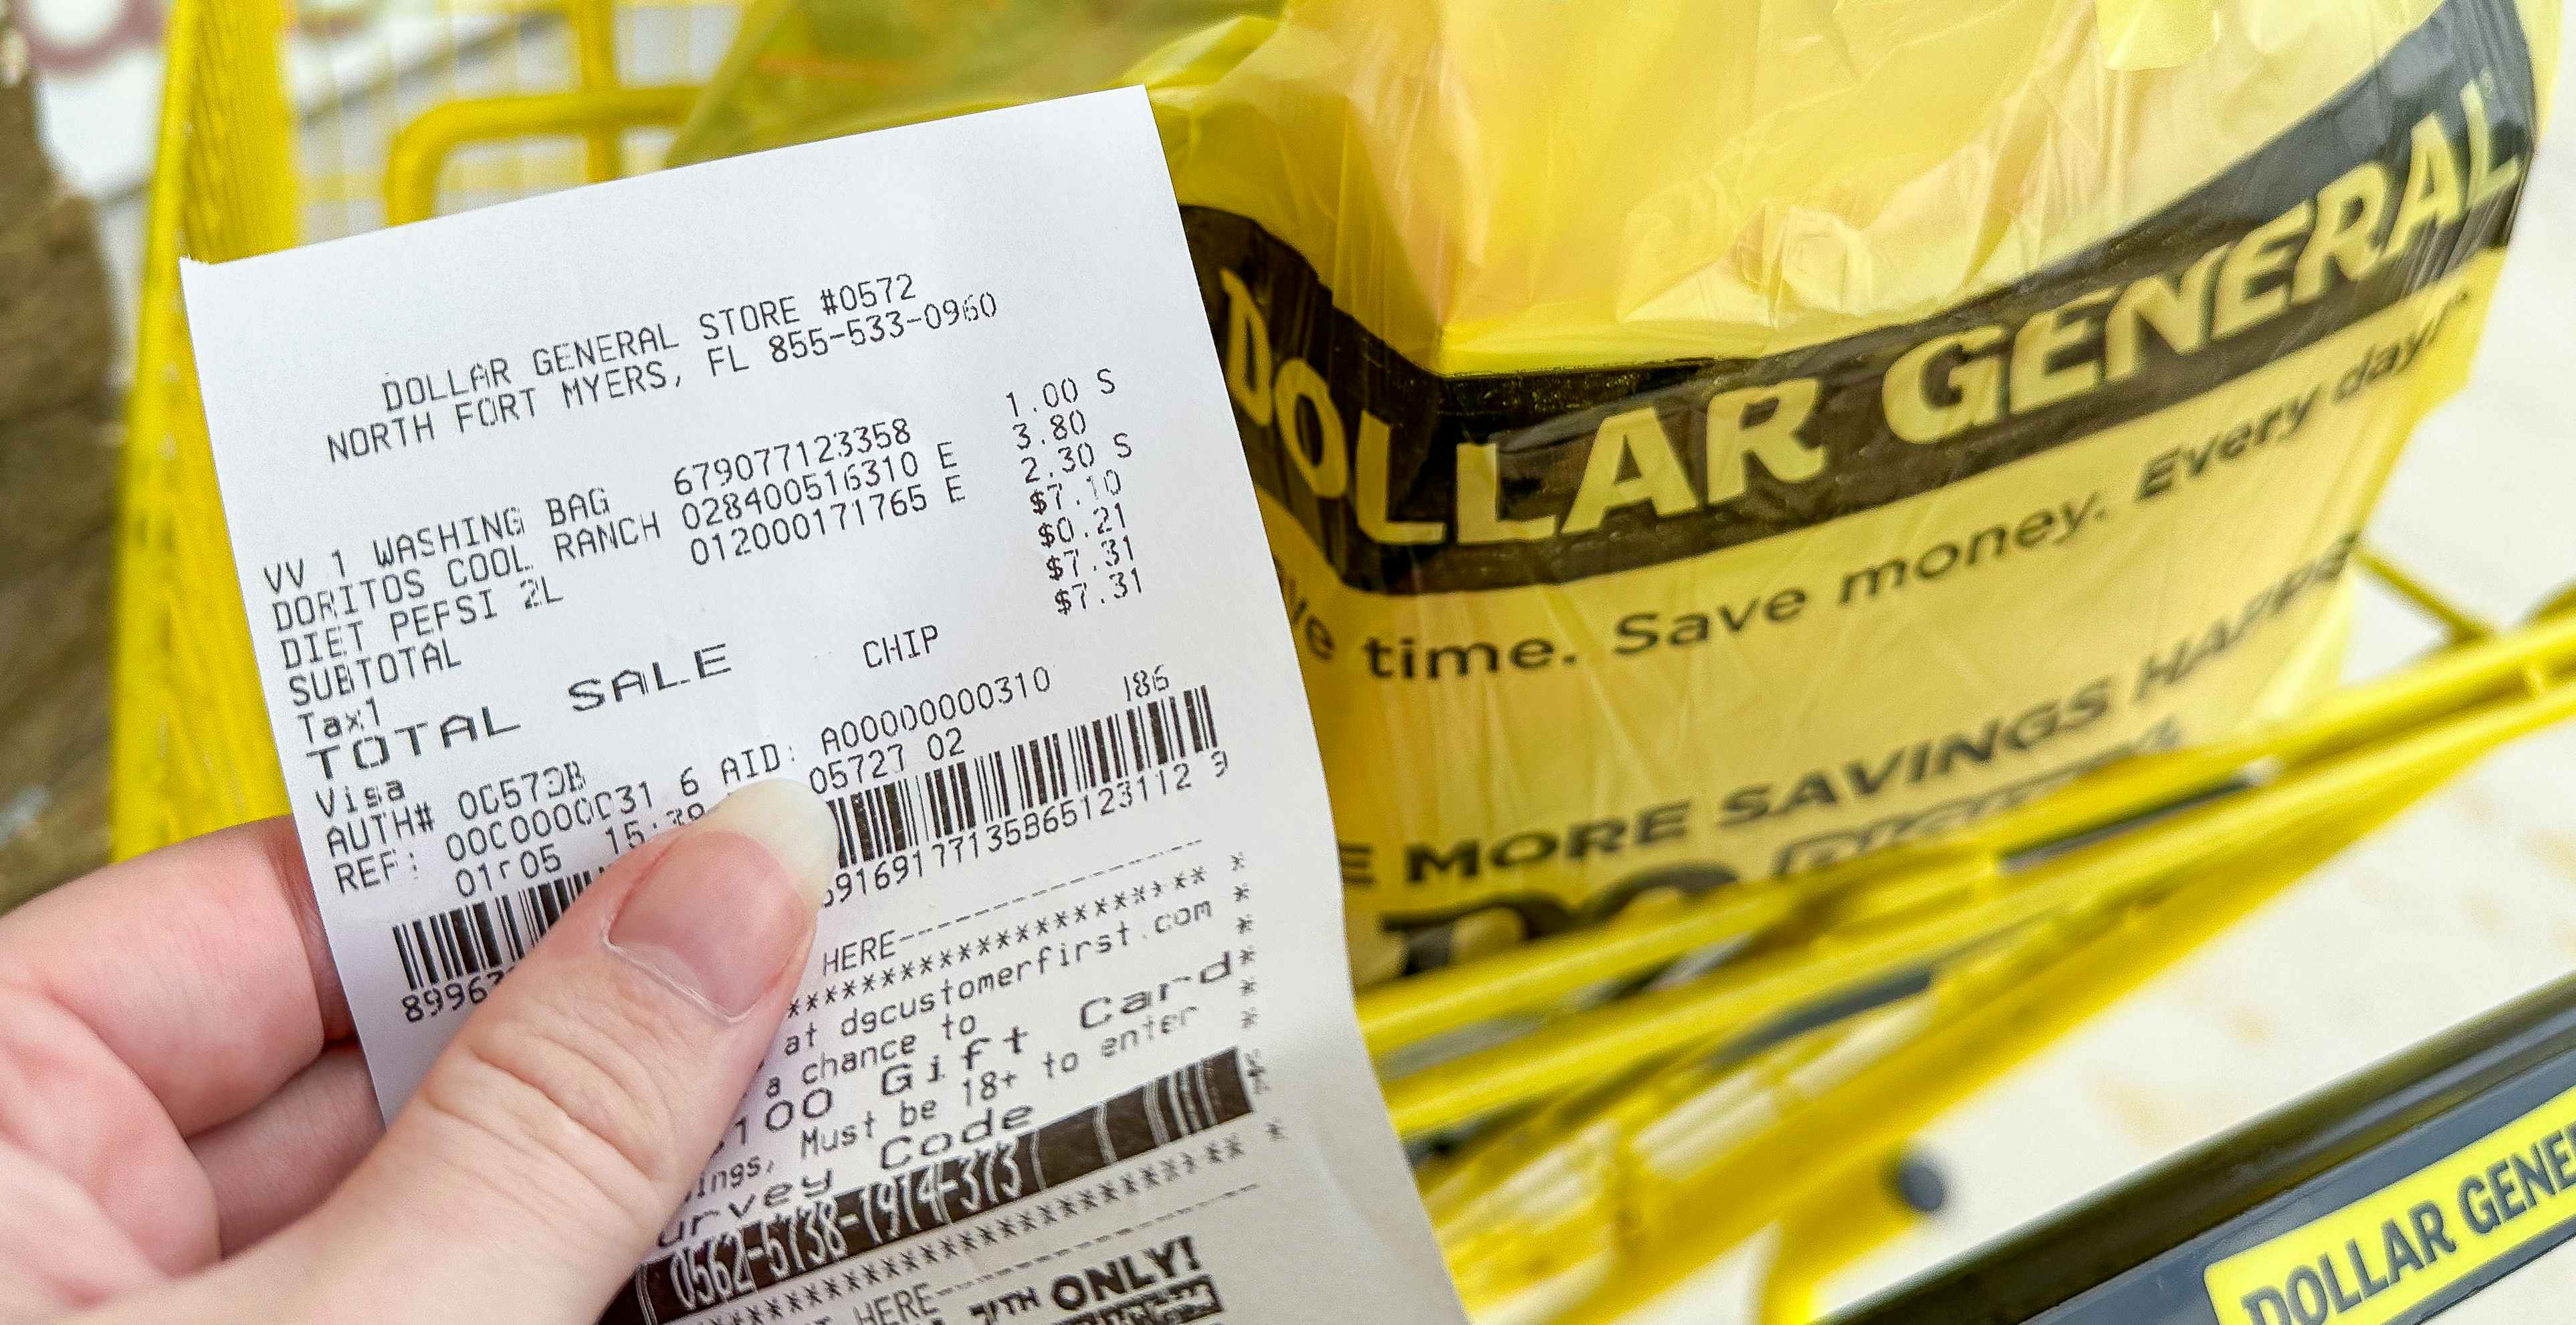 Hey Dollar General! Why Do Your Items Cost More Than One $1?!